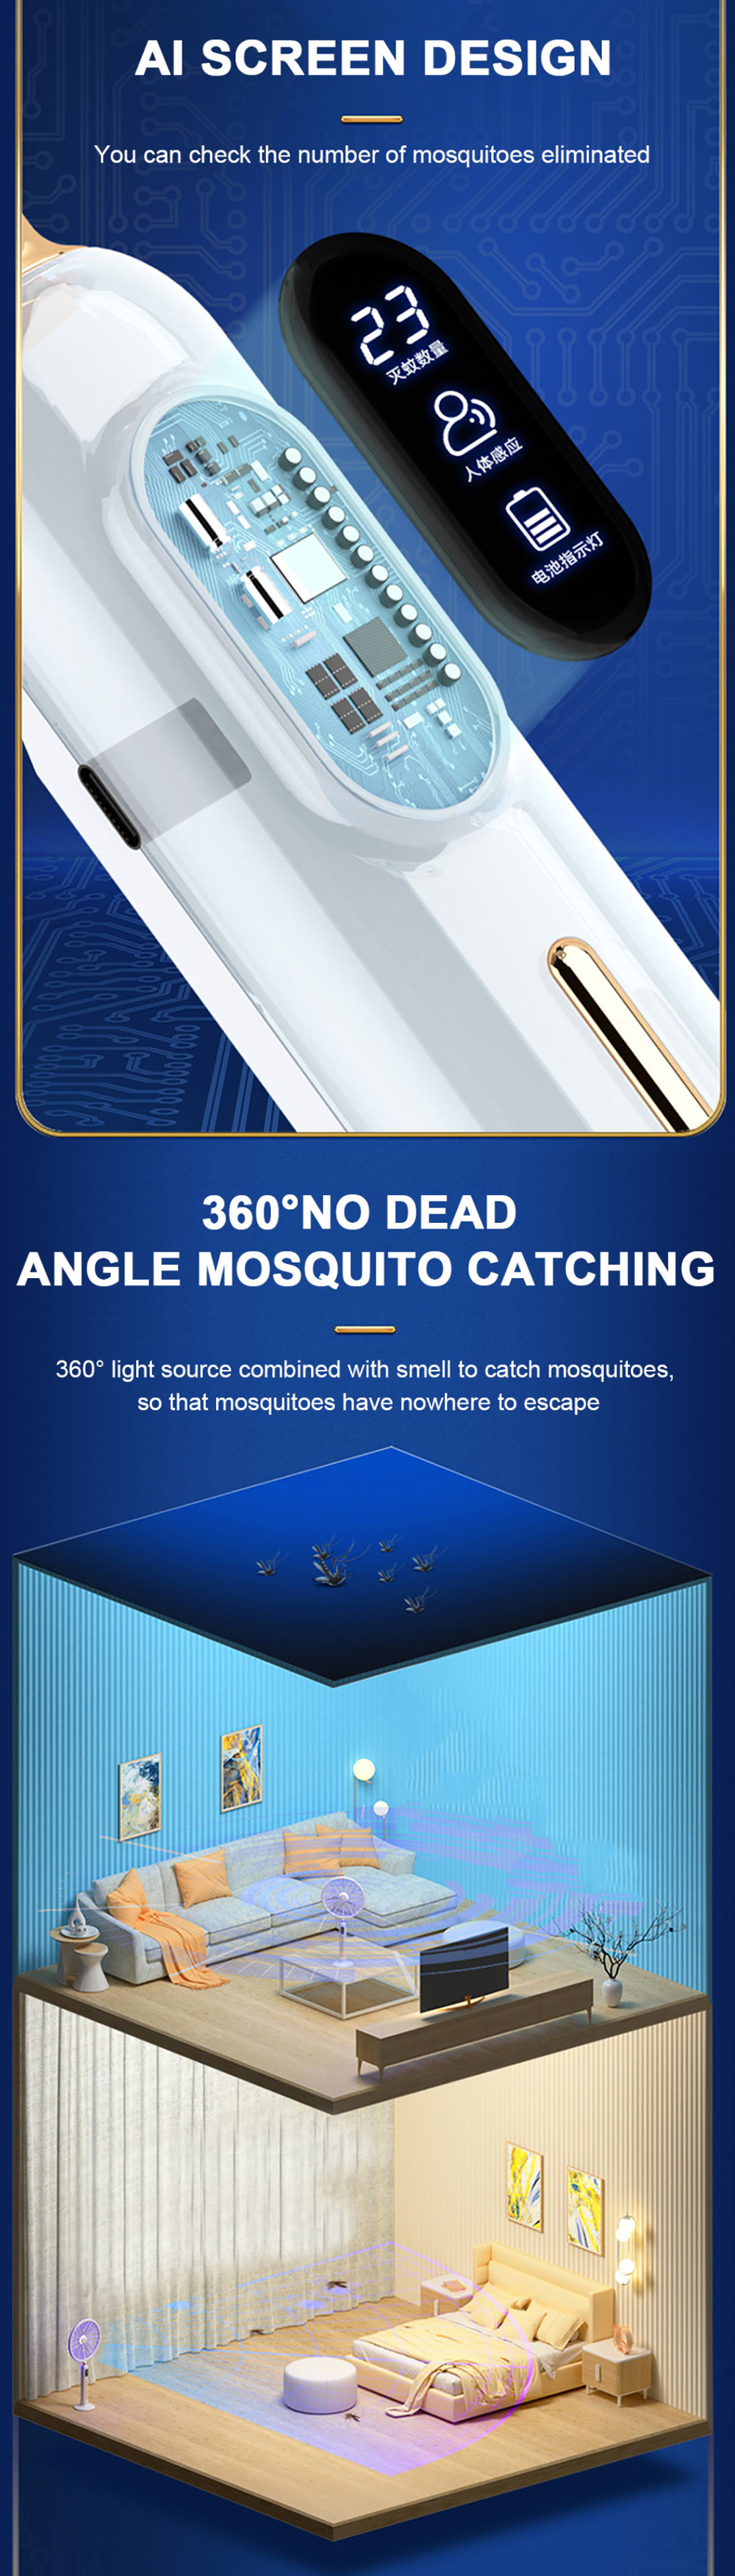 IPReereg-2-in-1-Electric-Mosquito-Swatter-5V-3W-USB-Type-C-Charging-LCD-Display-No-Radiation-Smart-C-1844495-3